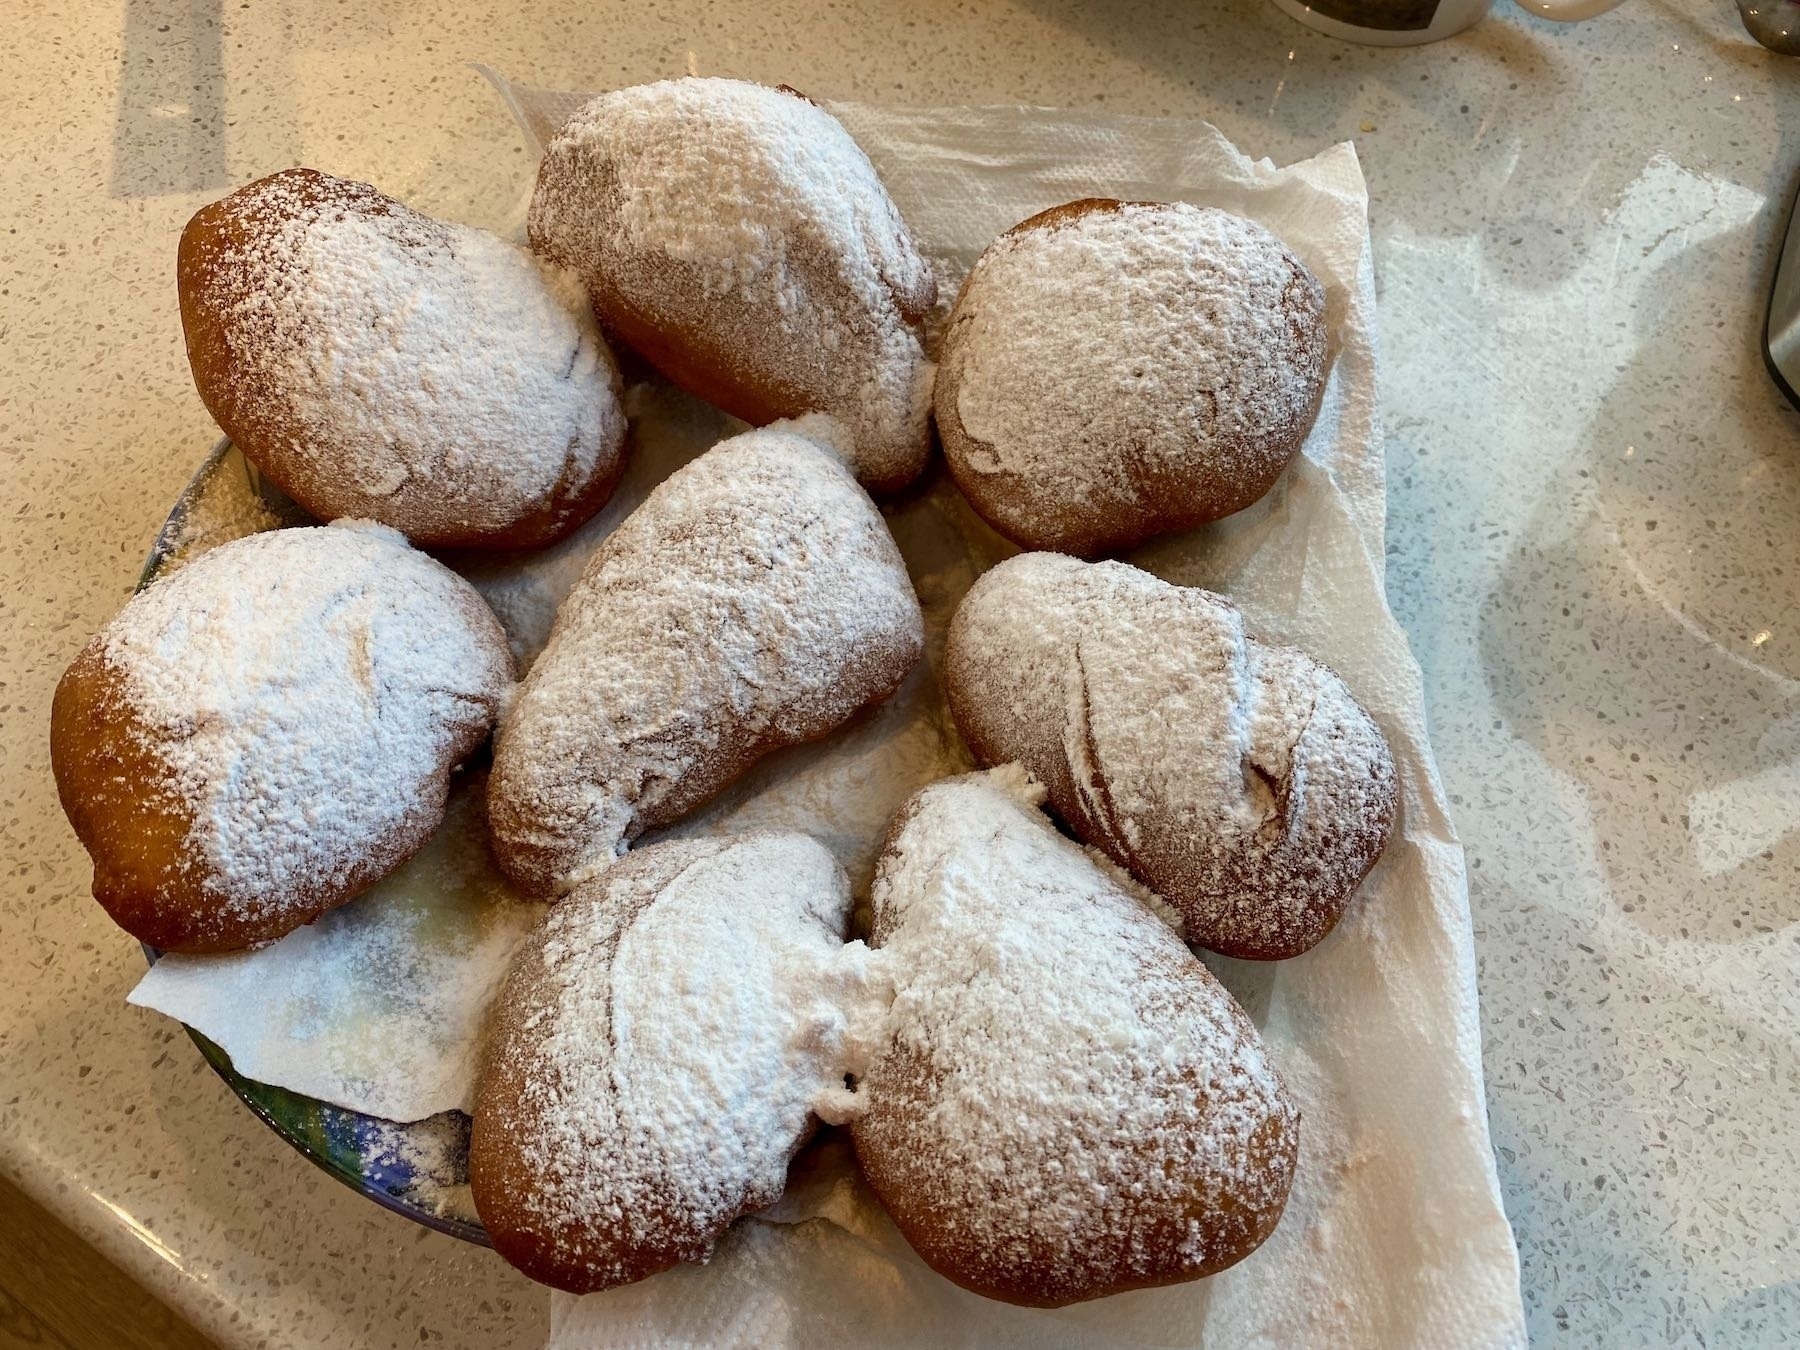 The finished donuts, sprinkled with icing sugar. 